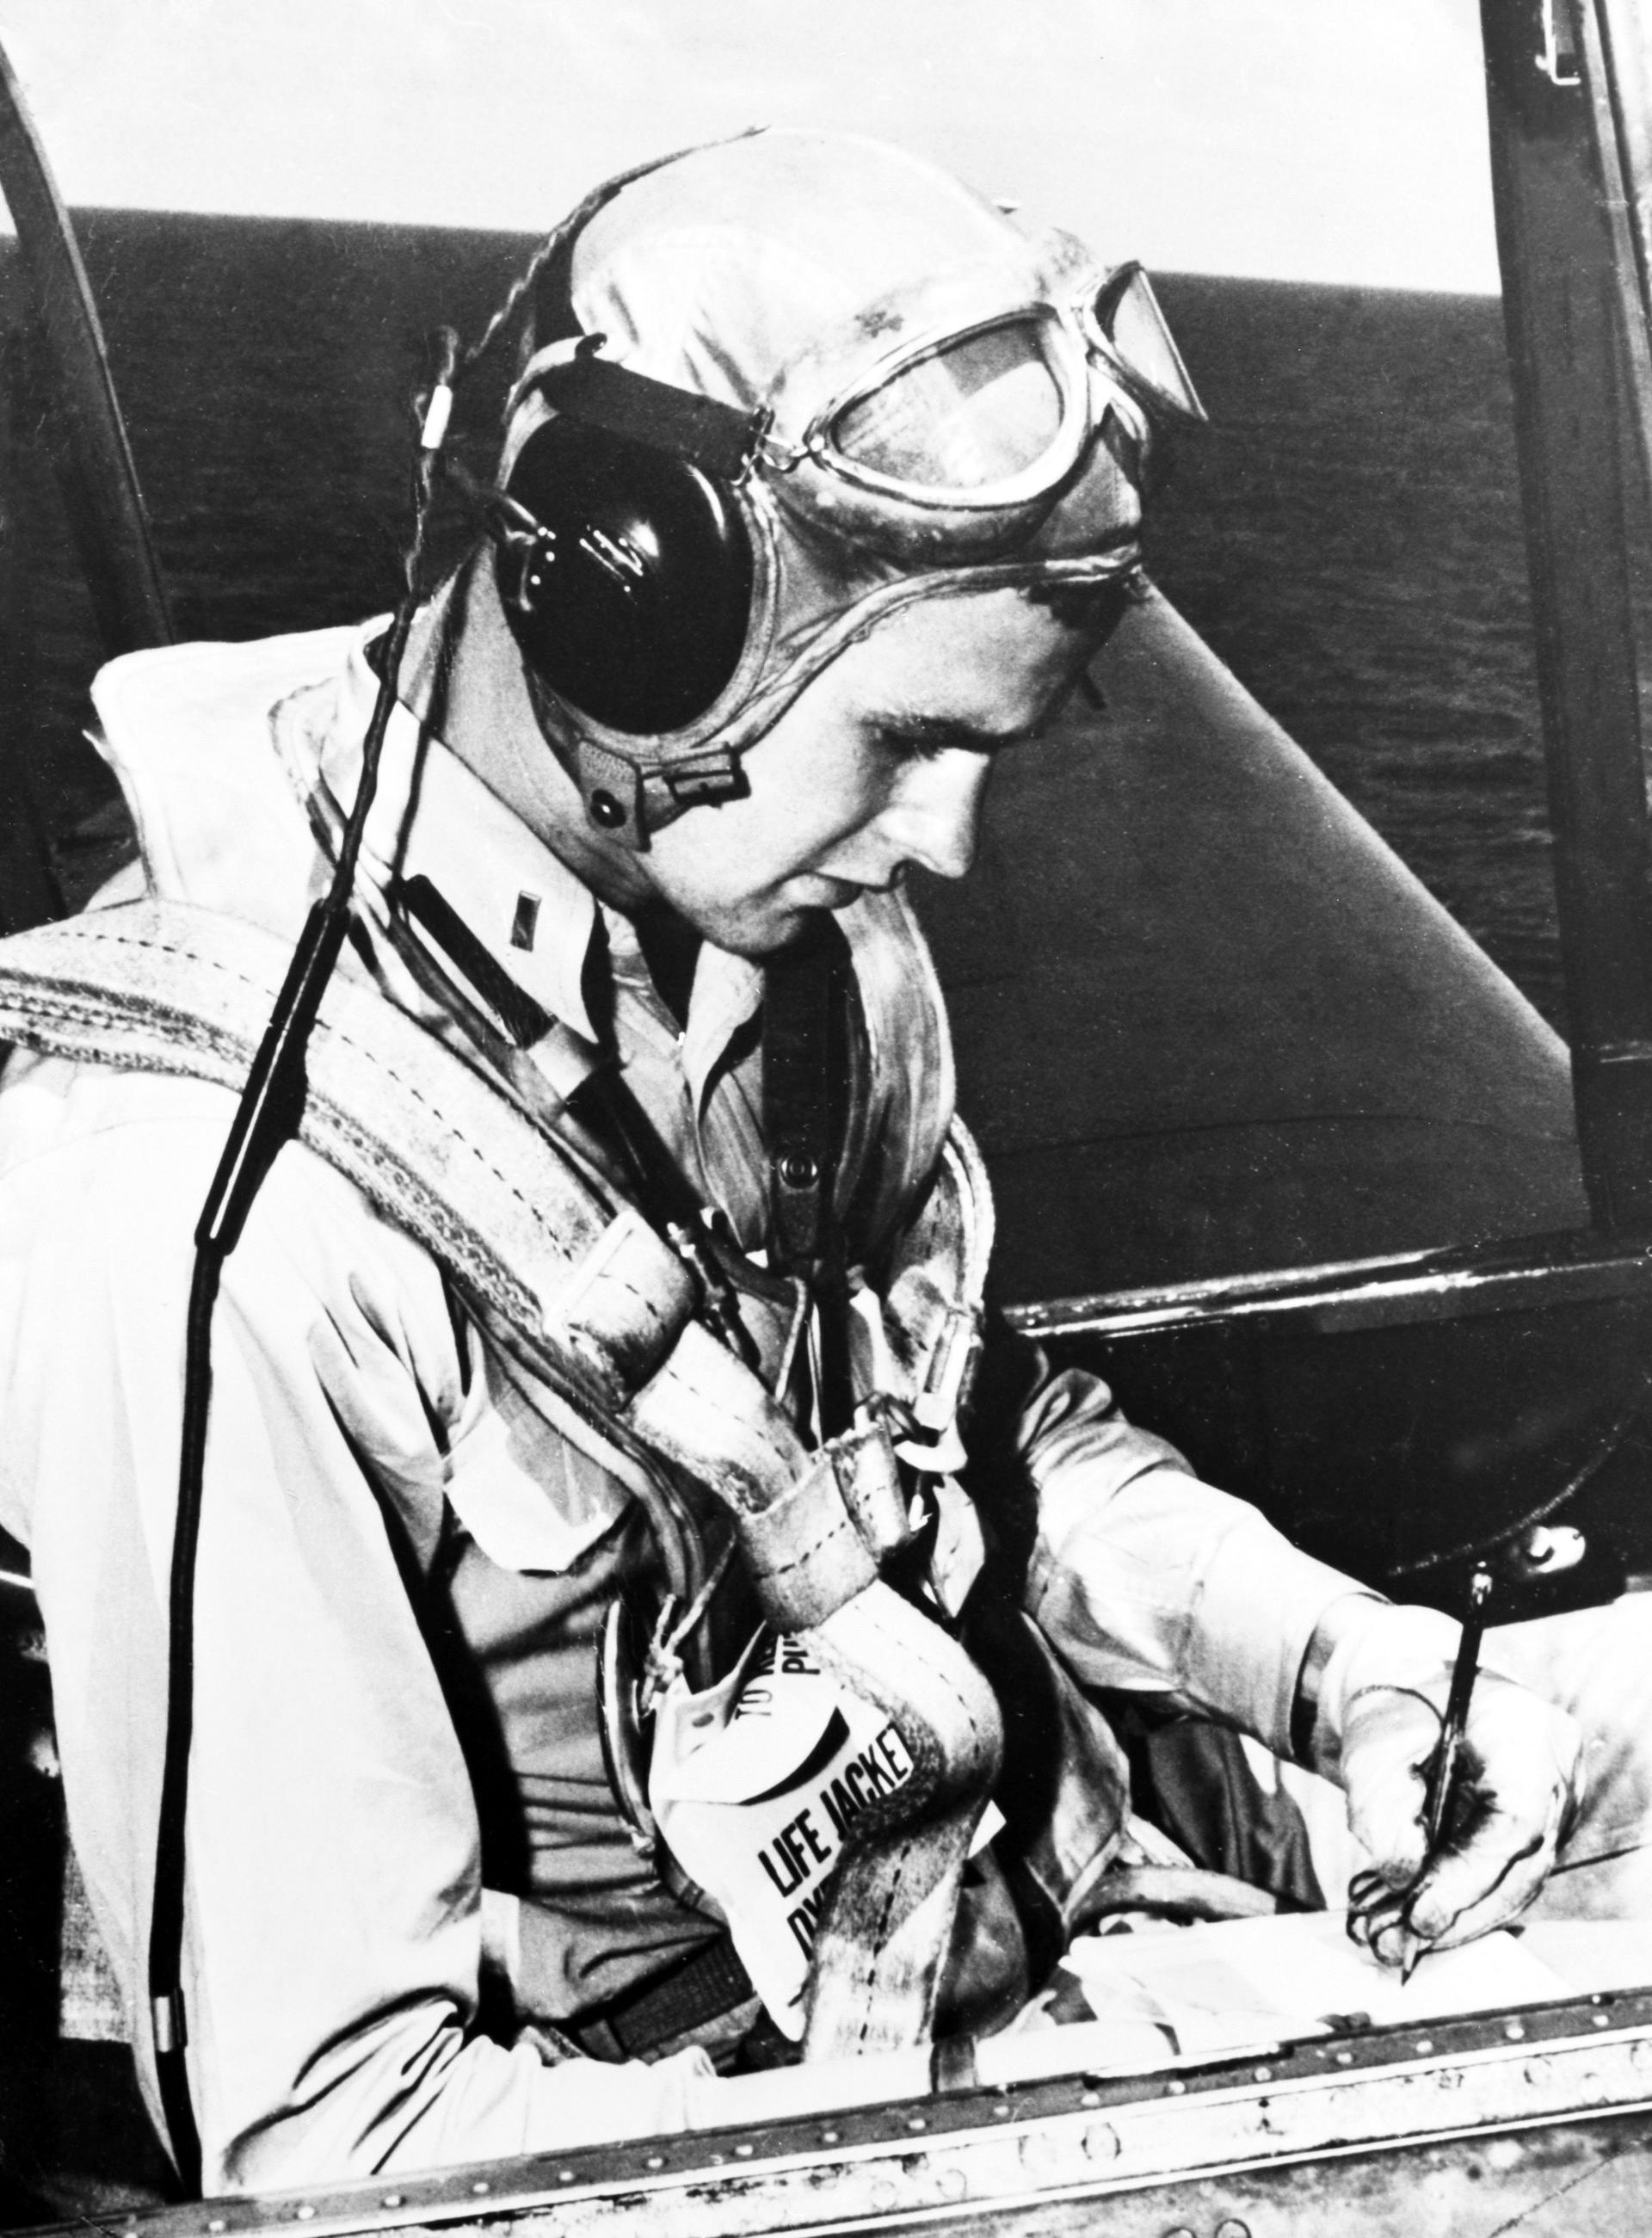 A young man in a pilot suit sits the cockpit of a WWII era Avenger plane